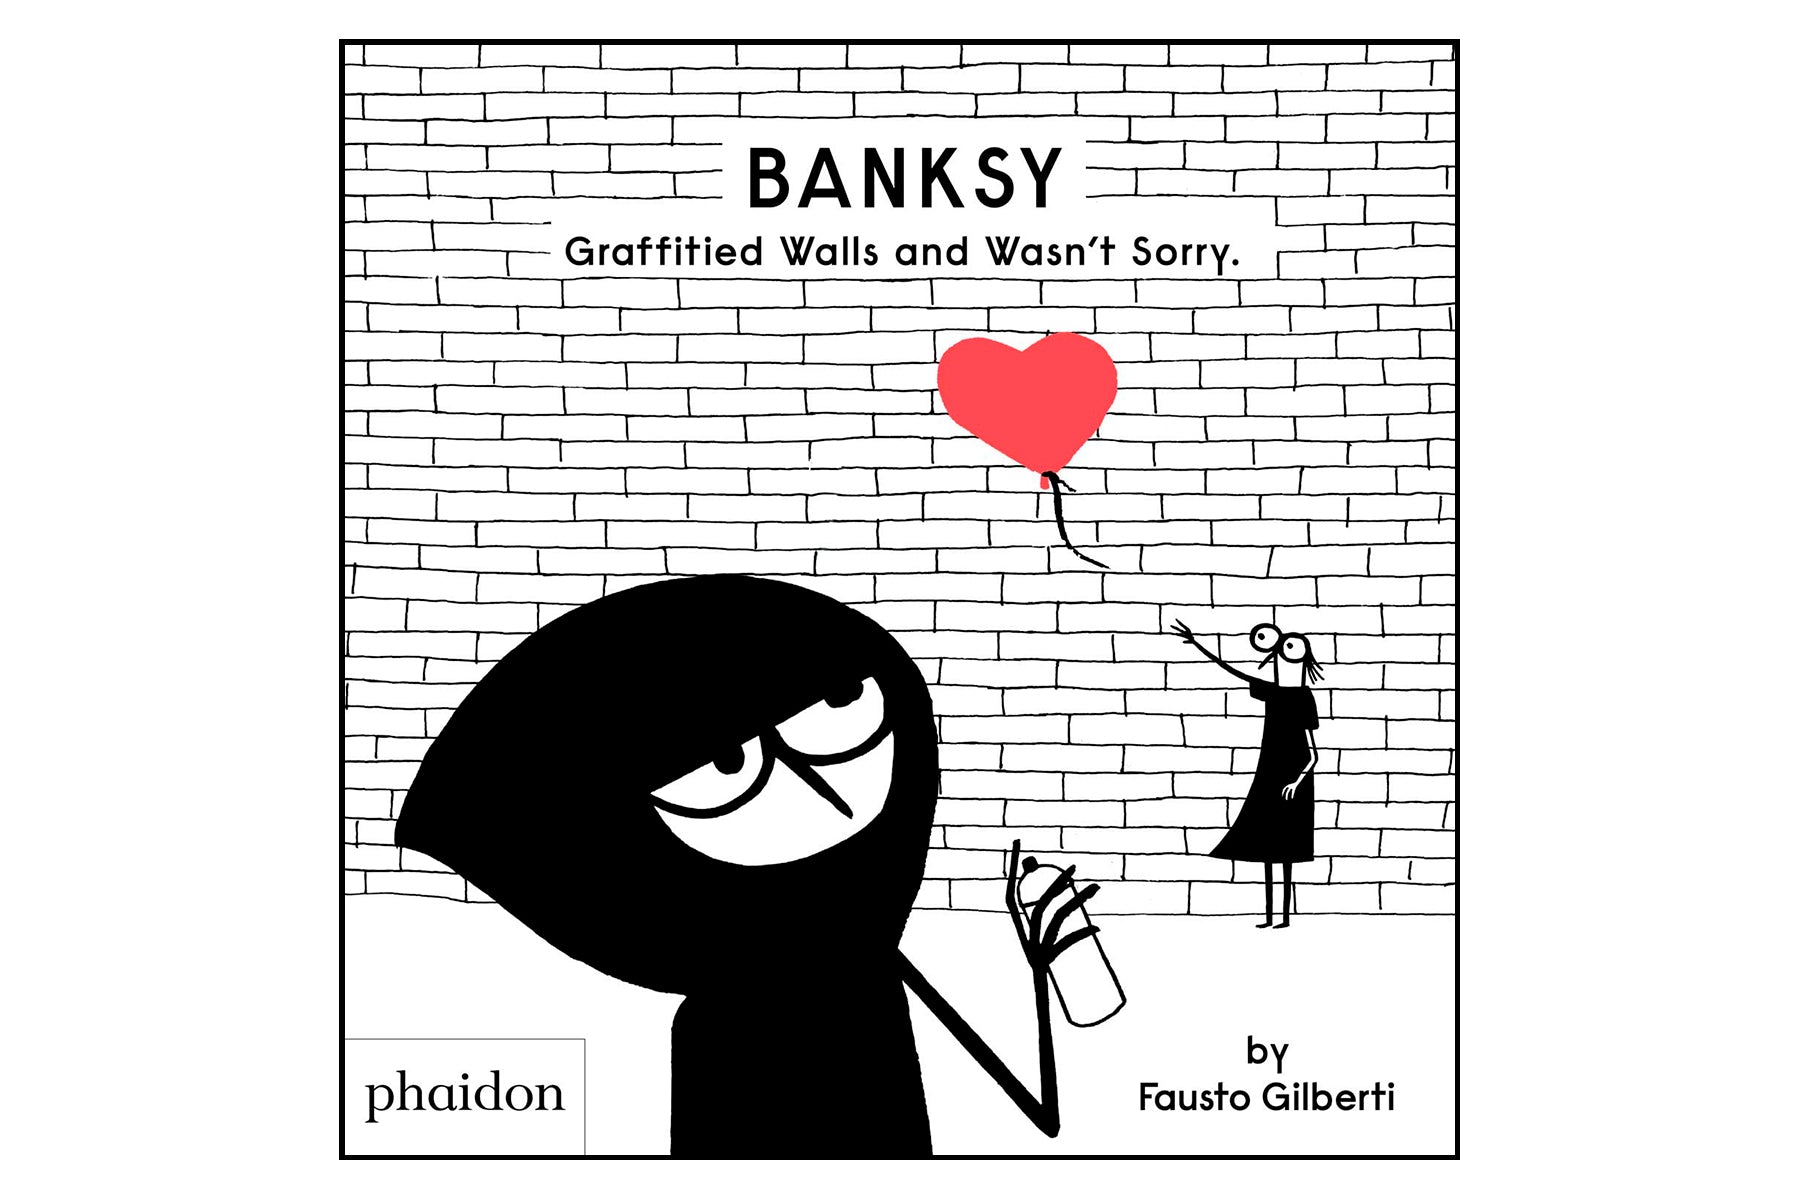 Banksy - Graffitied Walls and Wasn’t Sorry